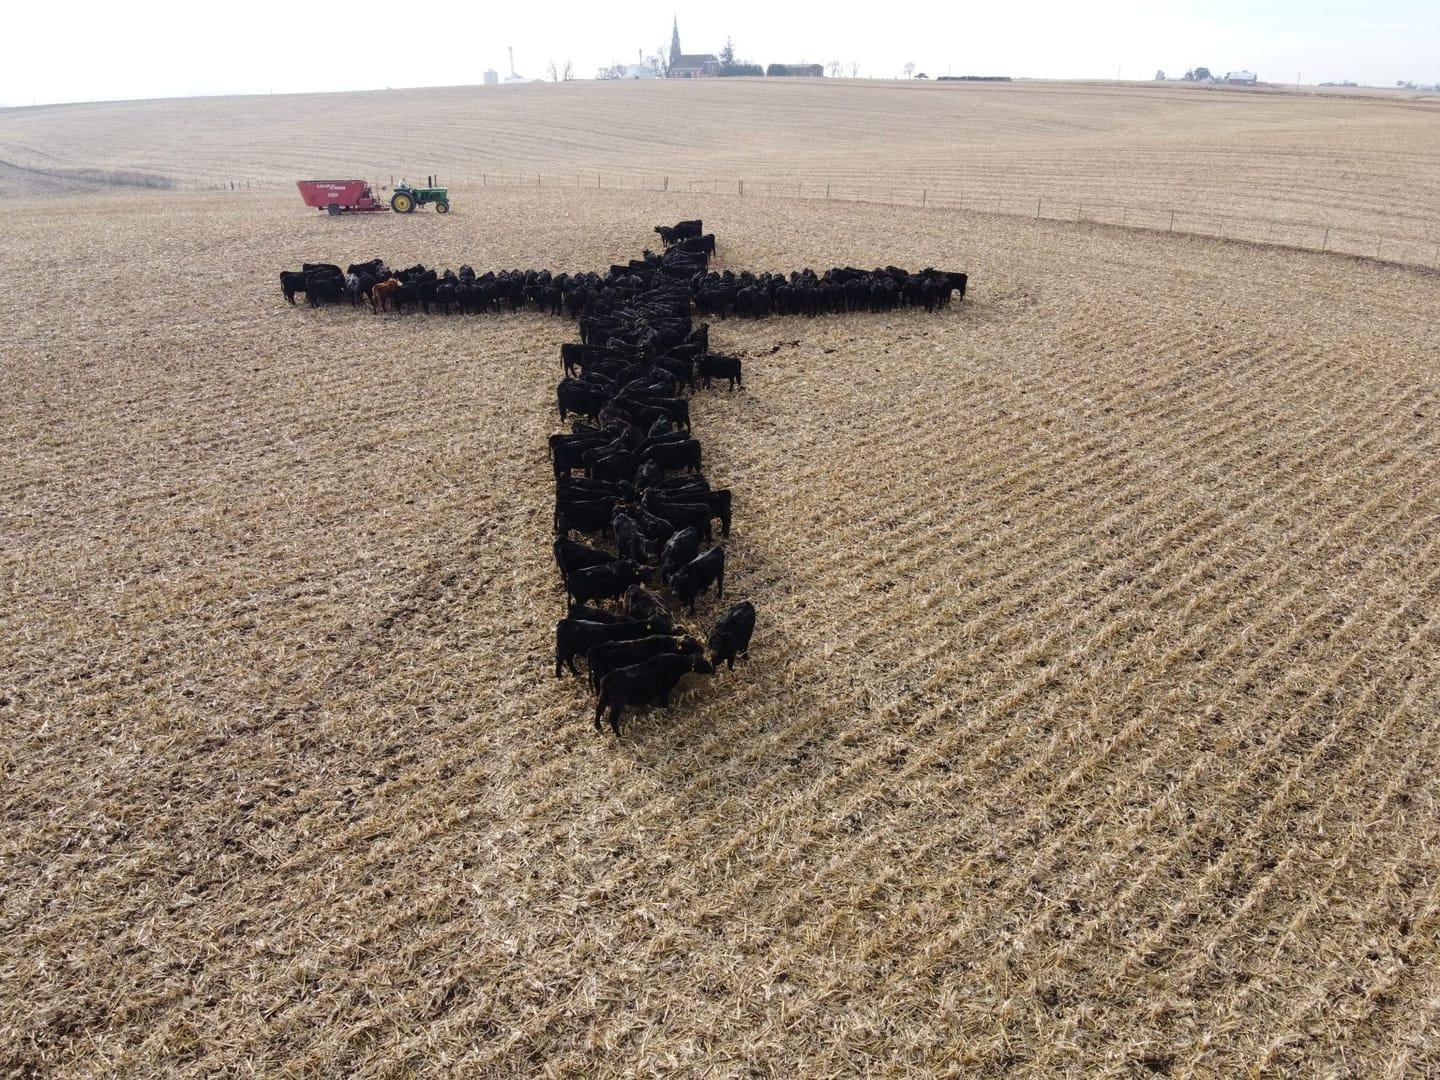 Iowa priest-photographer surprised by appeal of viral cattle cross image